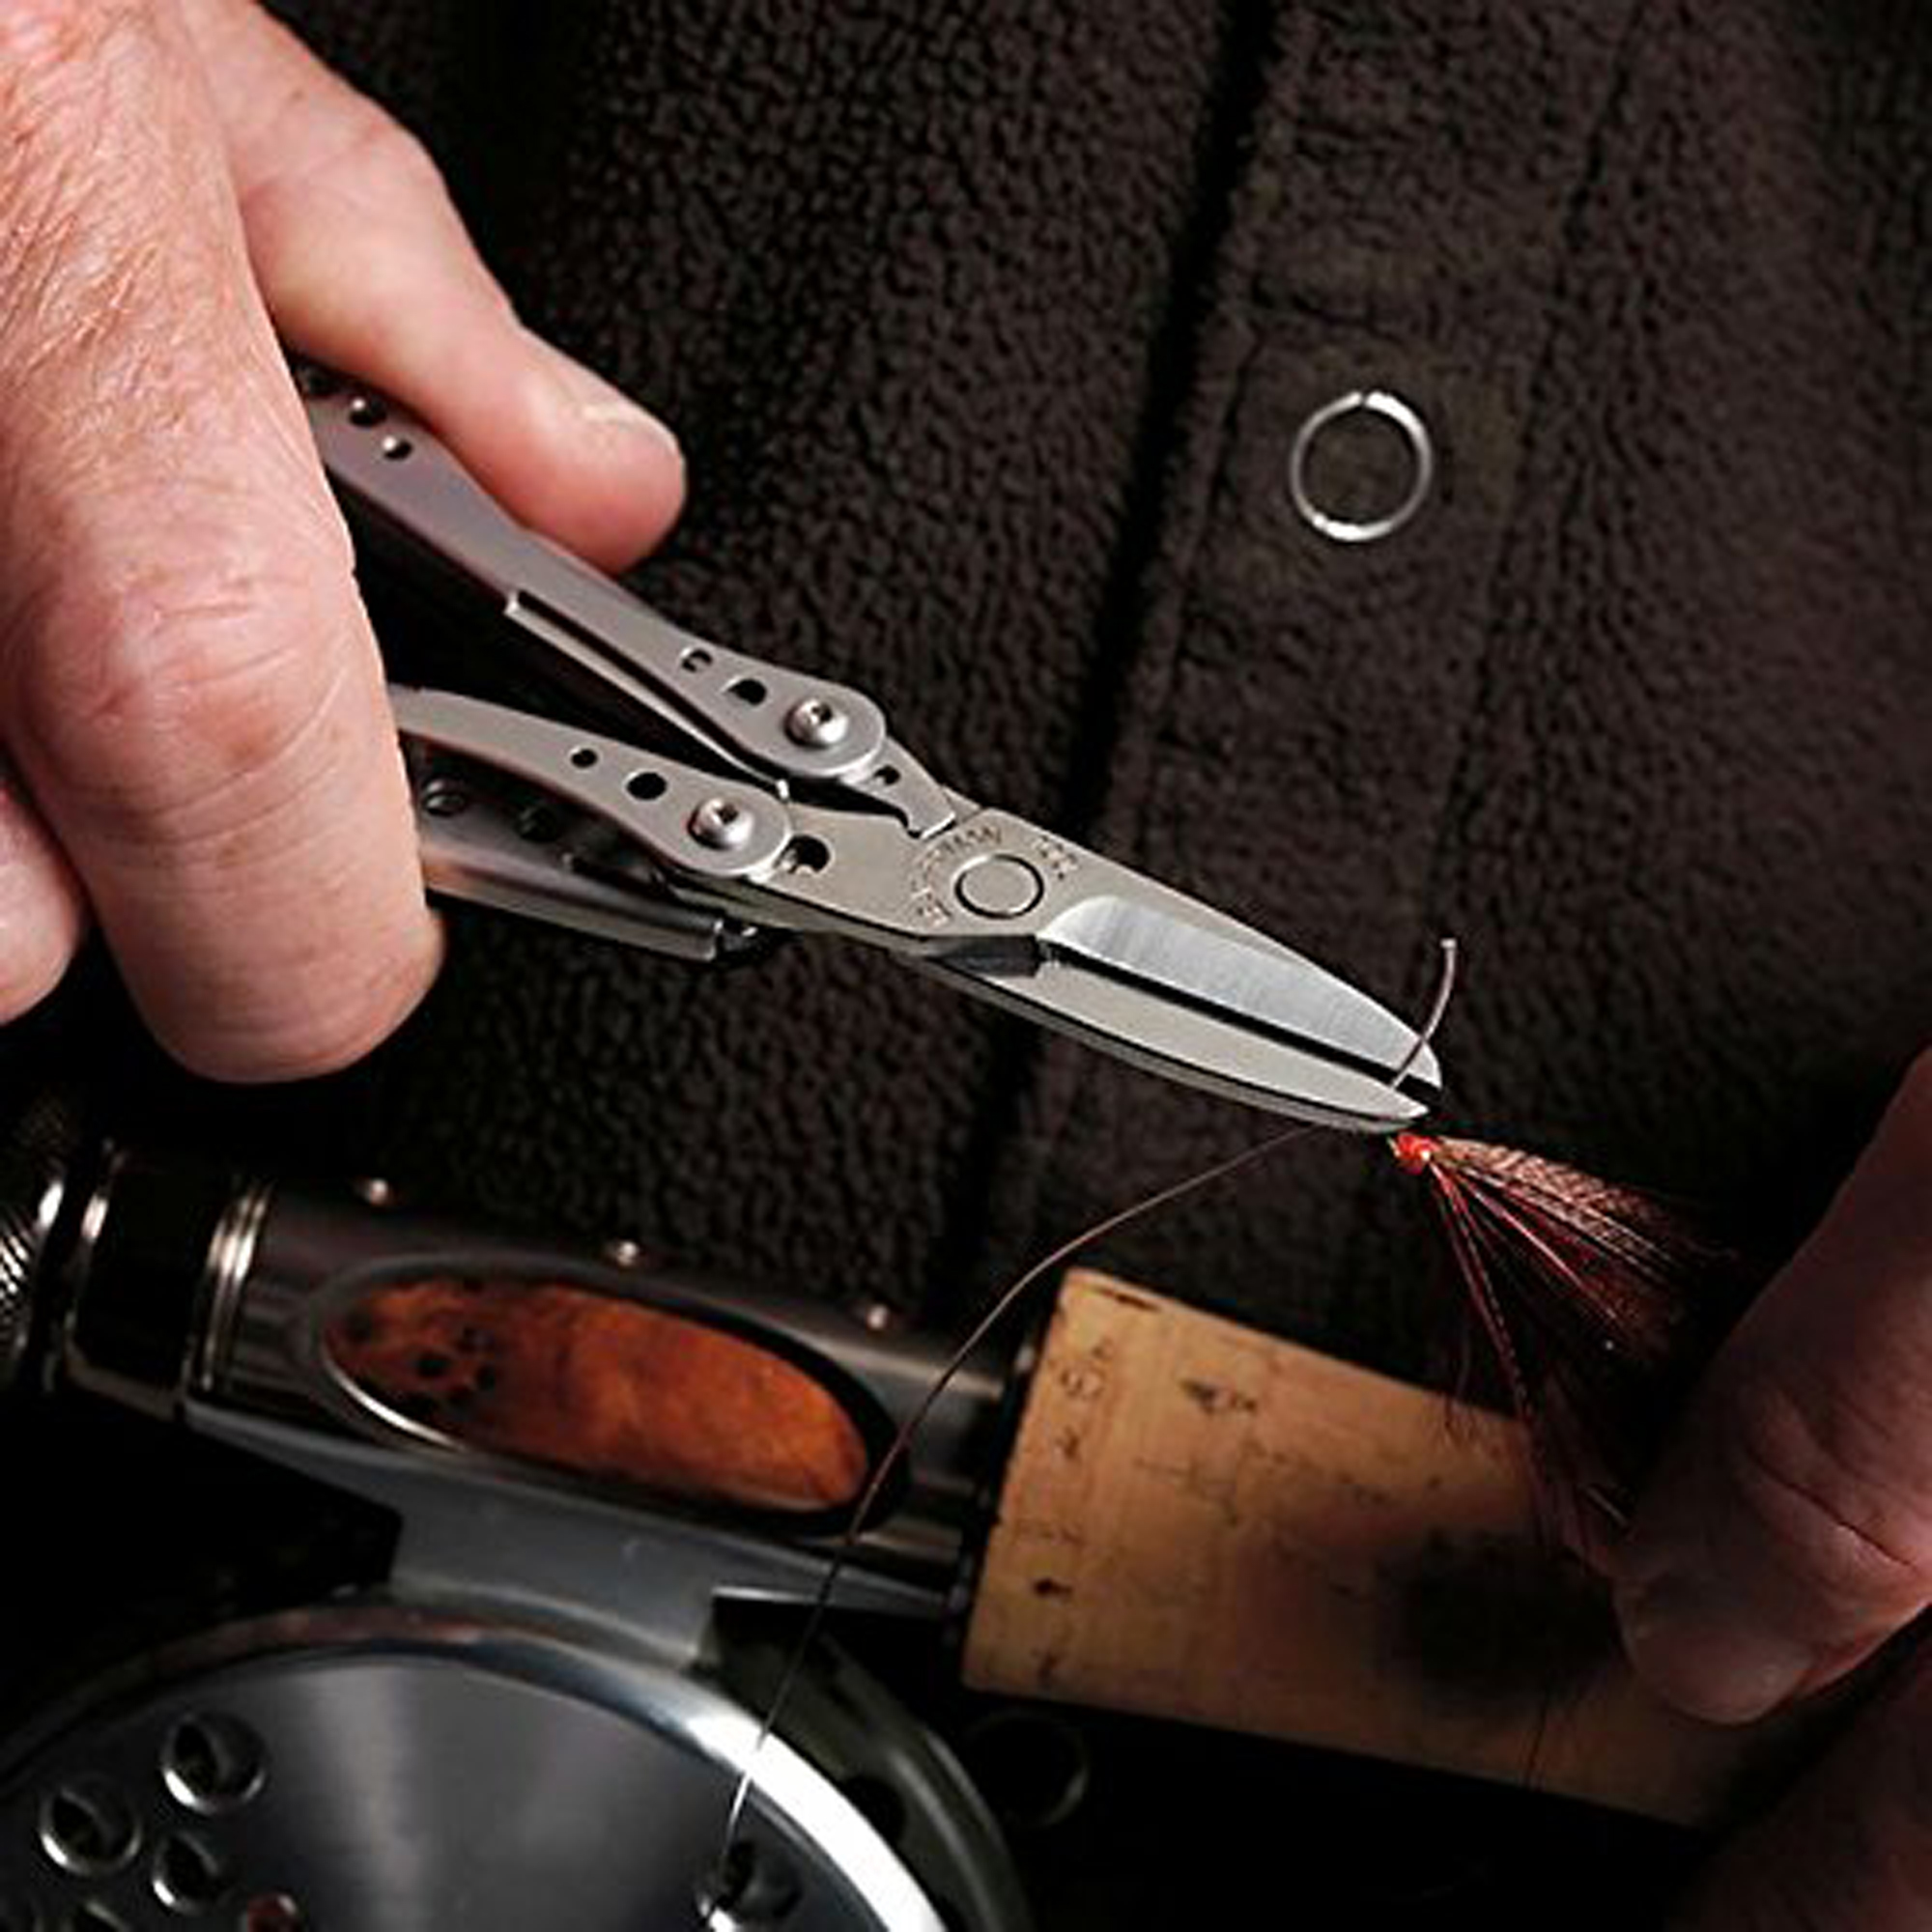 Leatherman, Style CS Keychain Multitool with Spring-Action Scissors and Grooming Tools, Stainless Steel - image 4 of 7